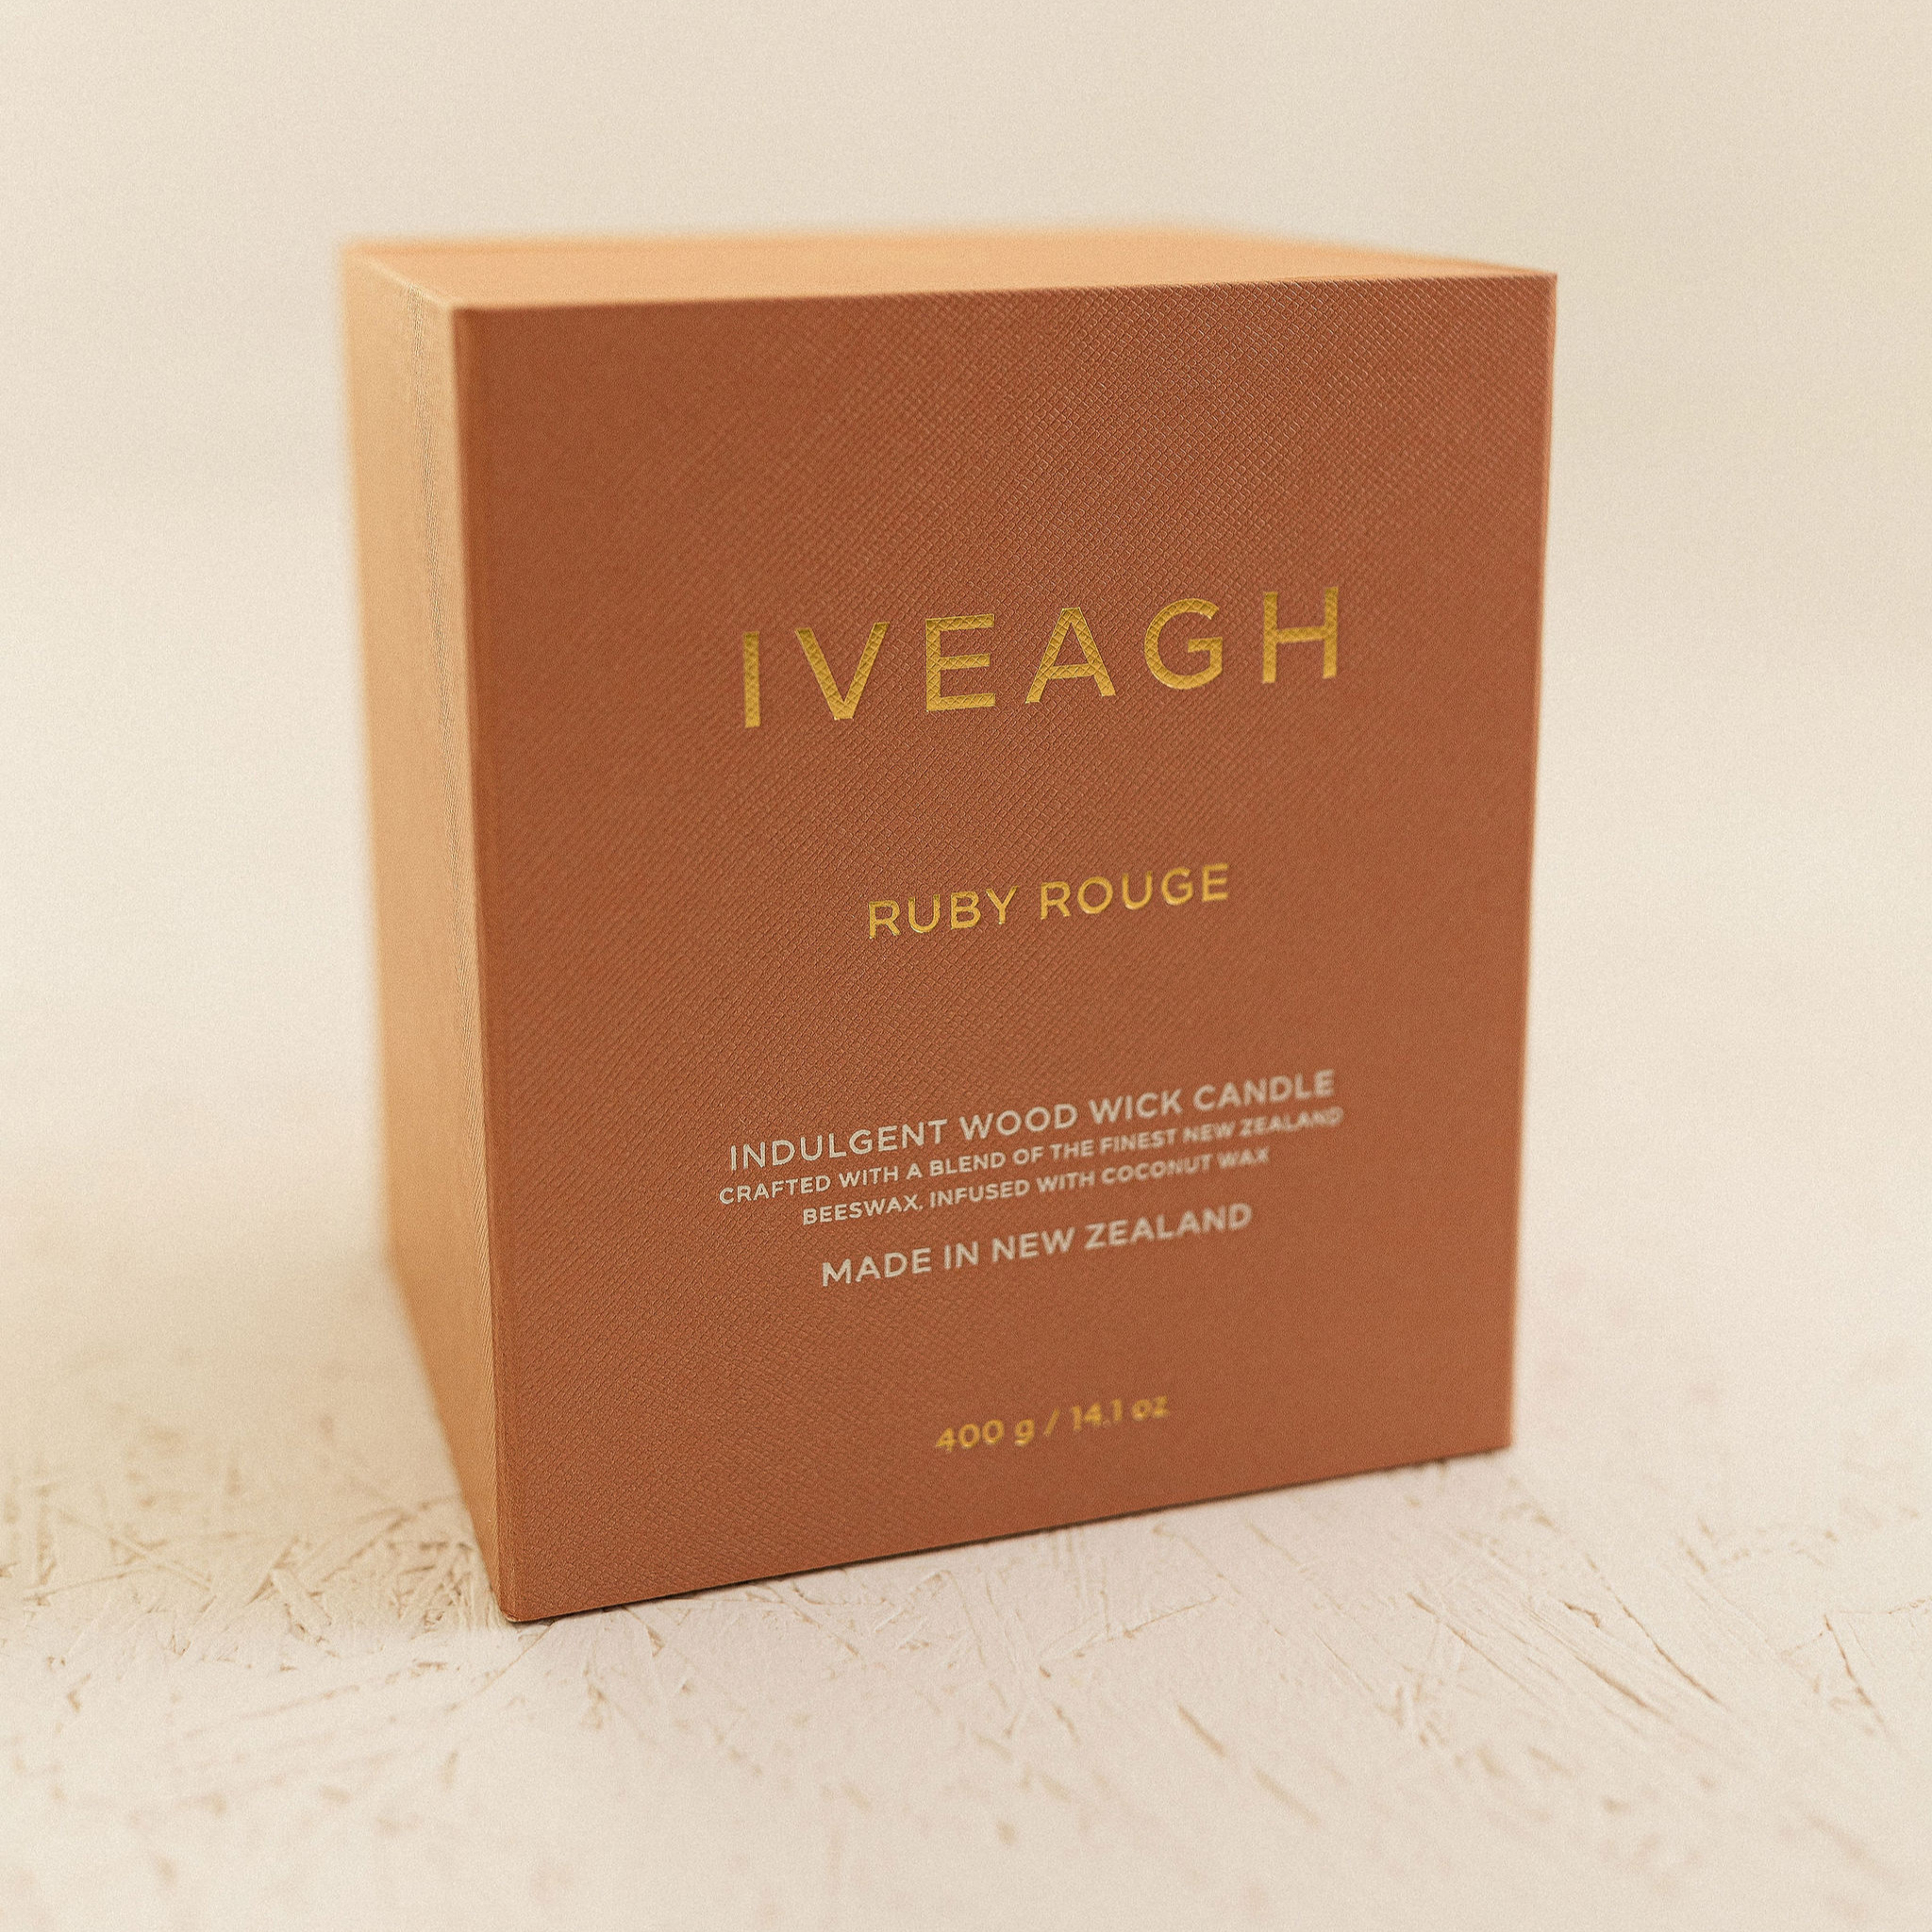 IVEAGH - Ruby Rouge